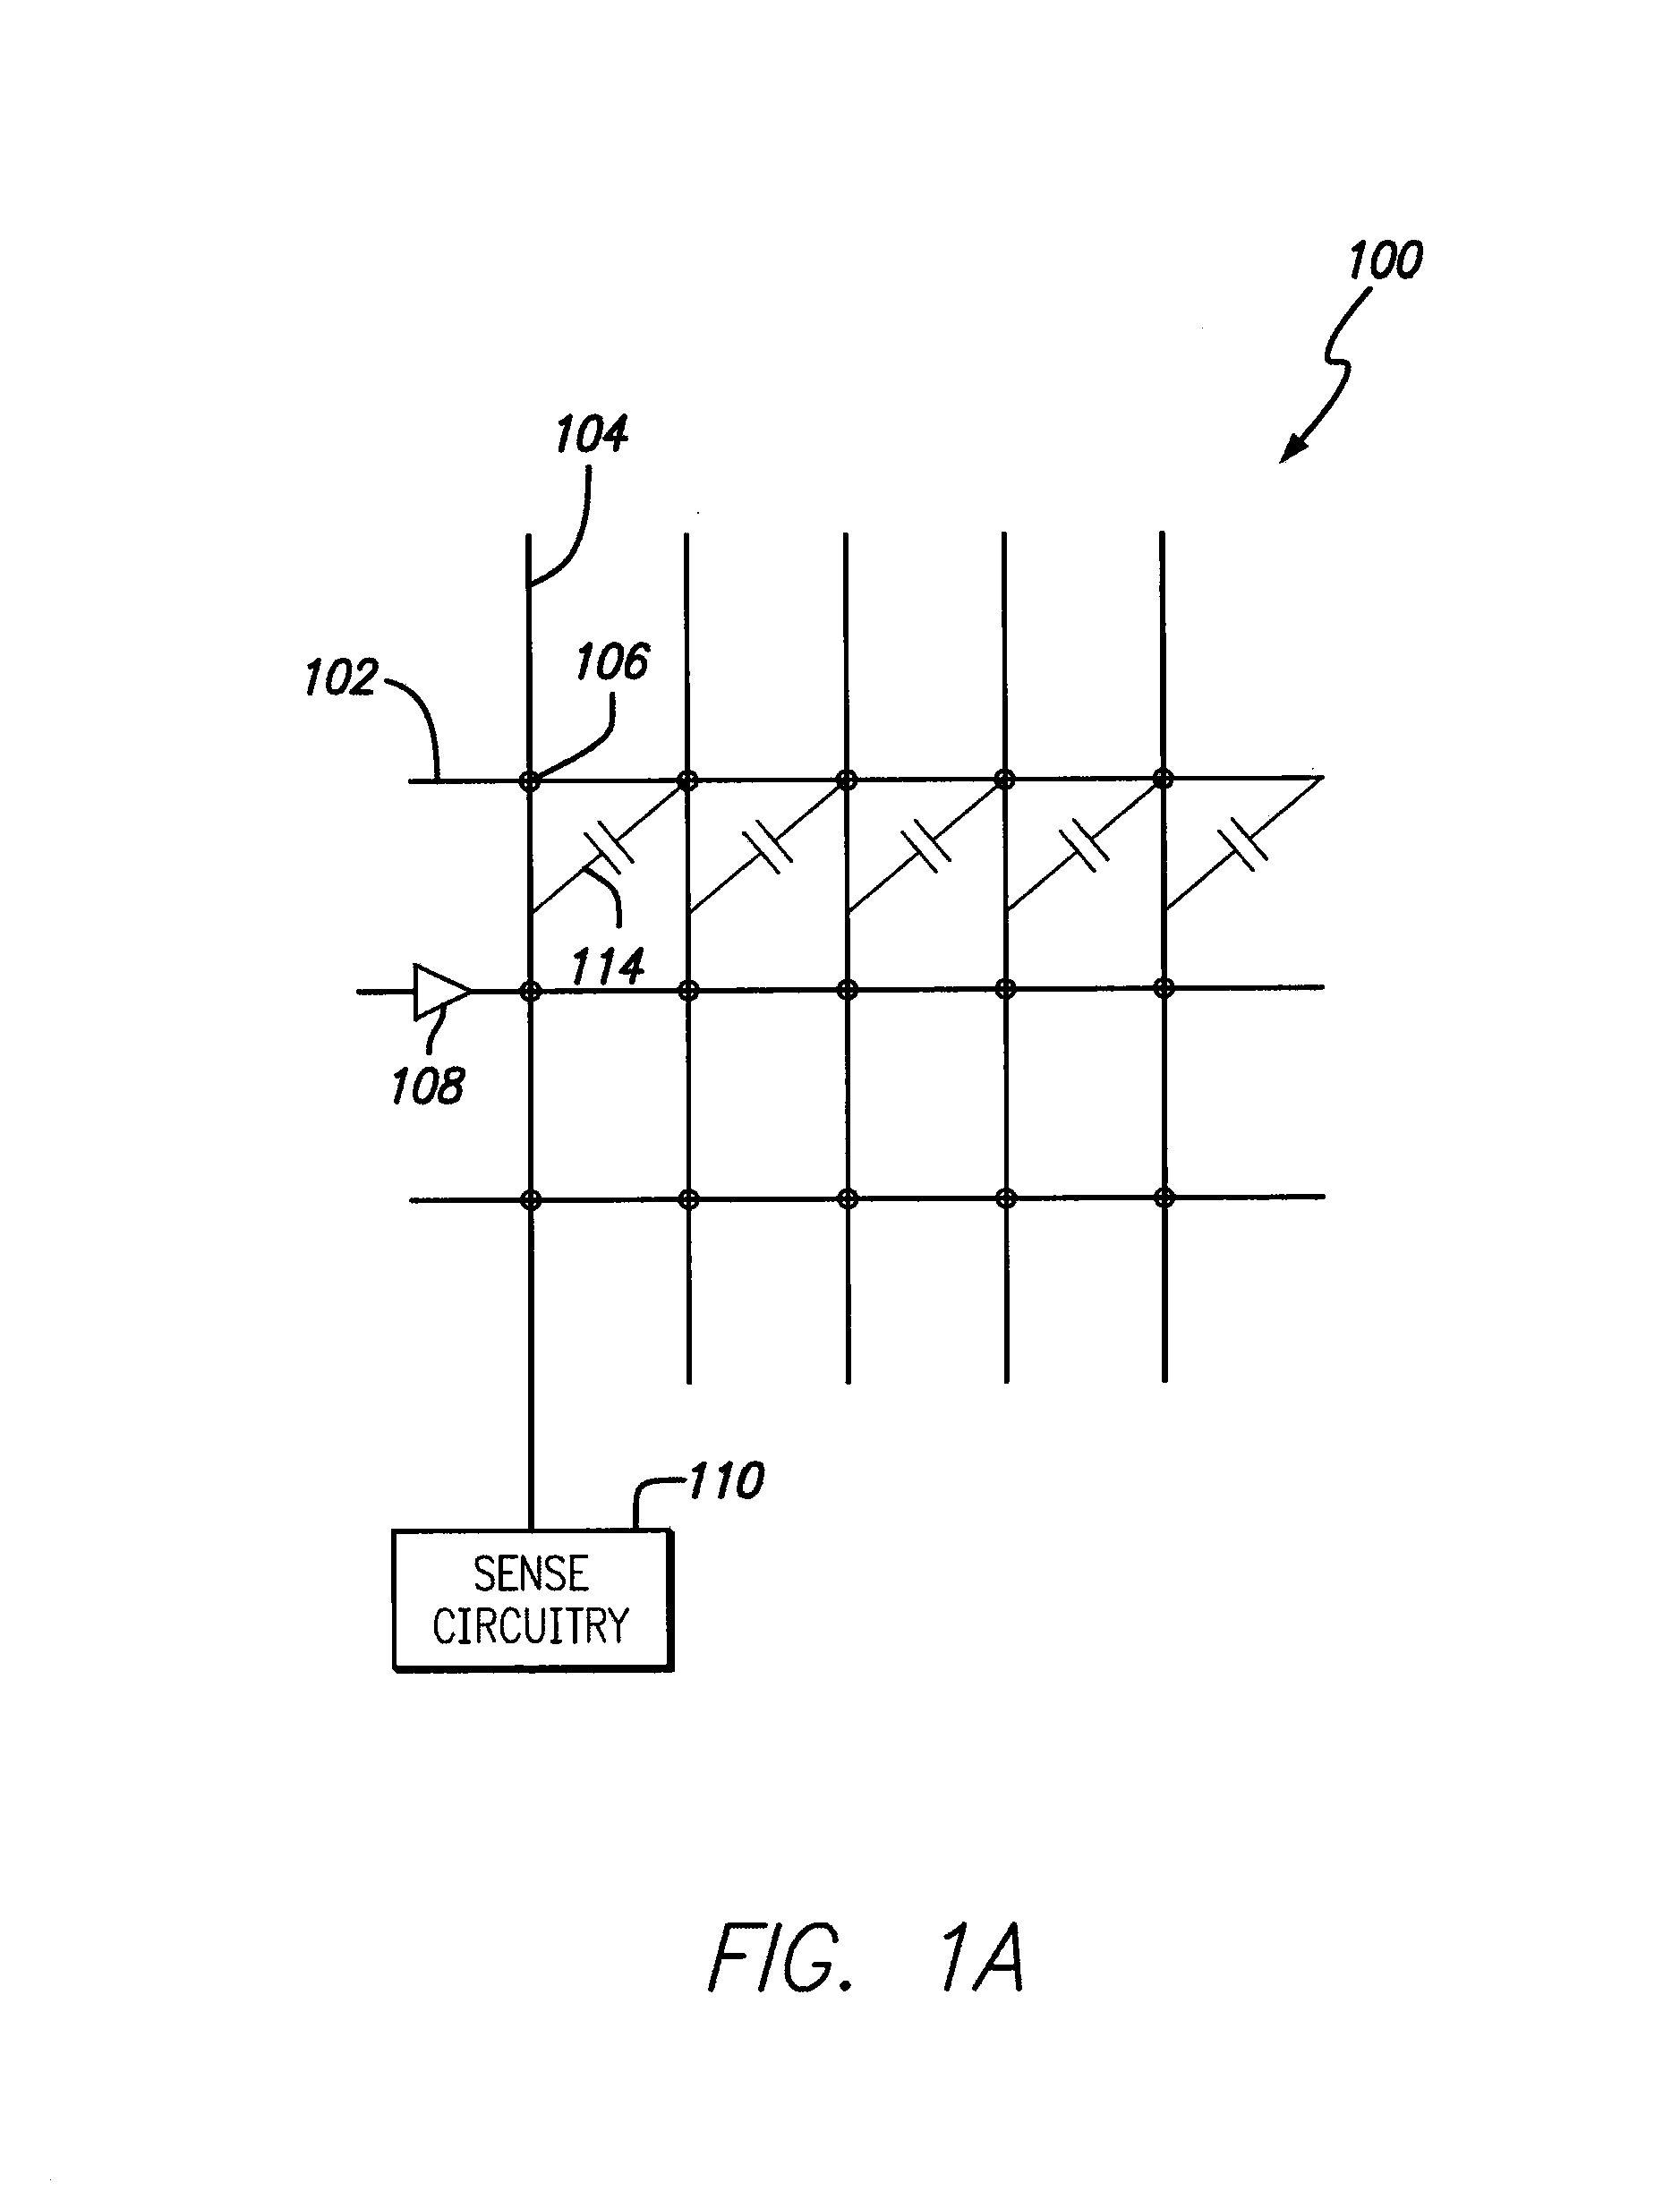 Capacitance touch near-field-far field switching